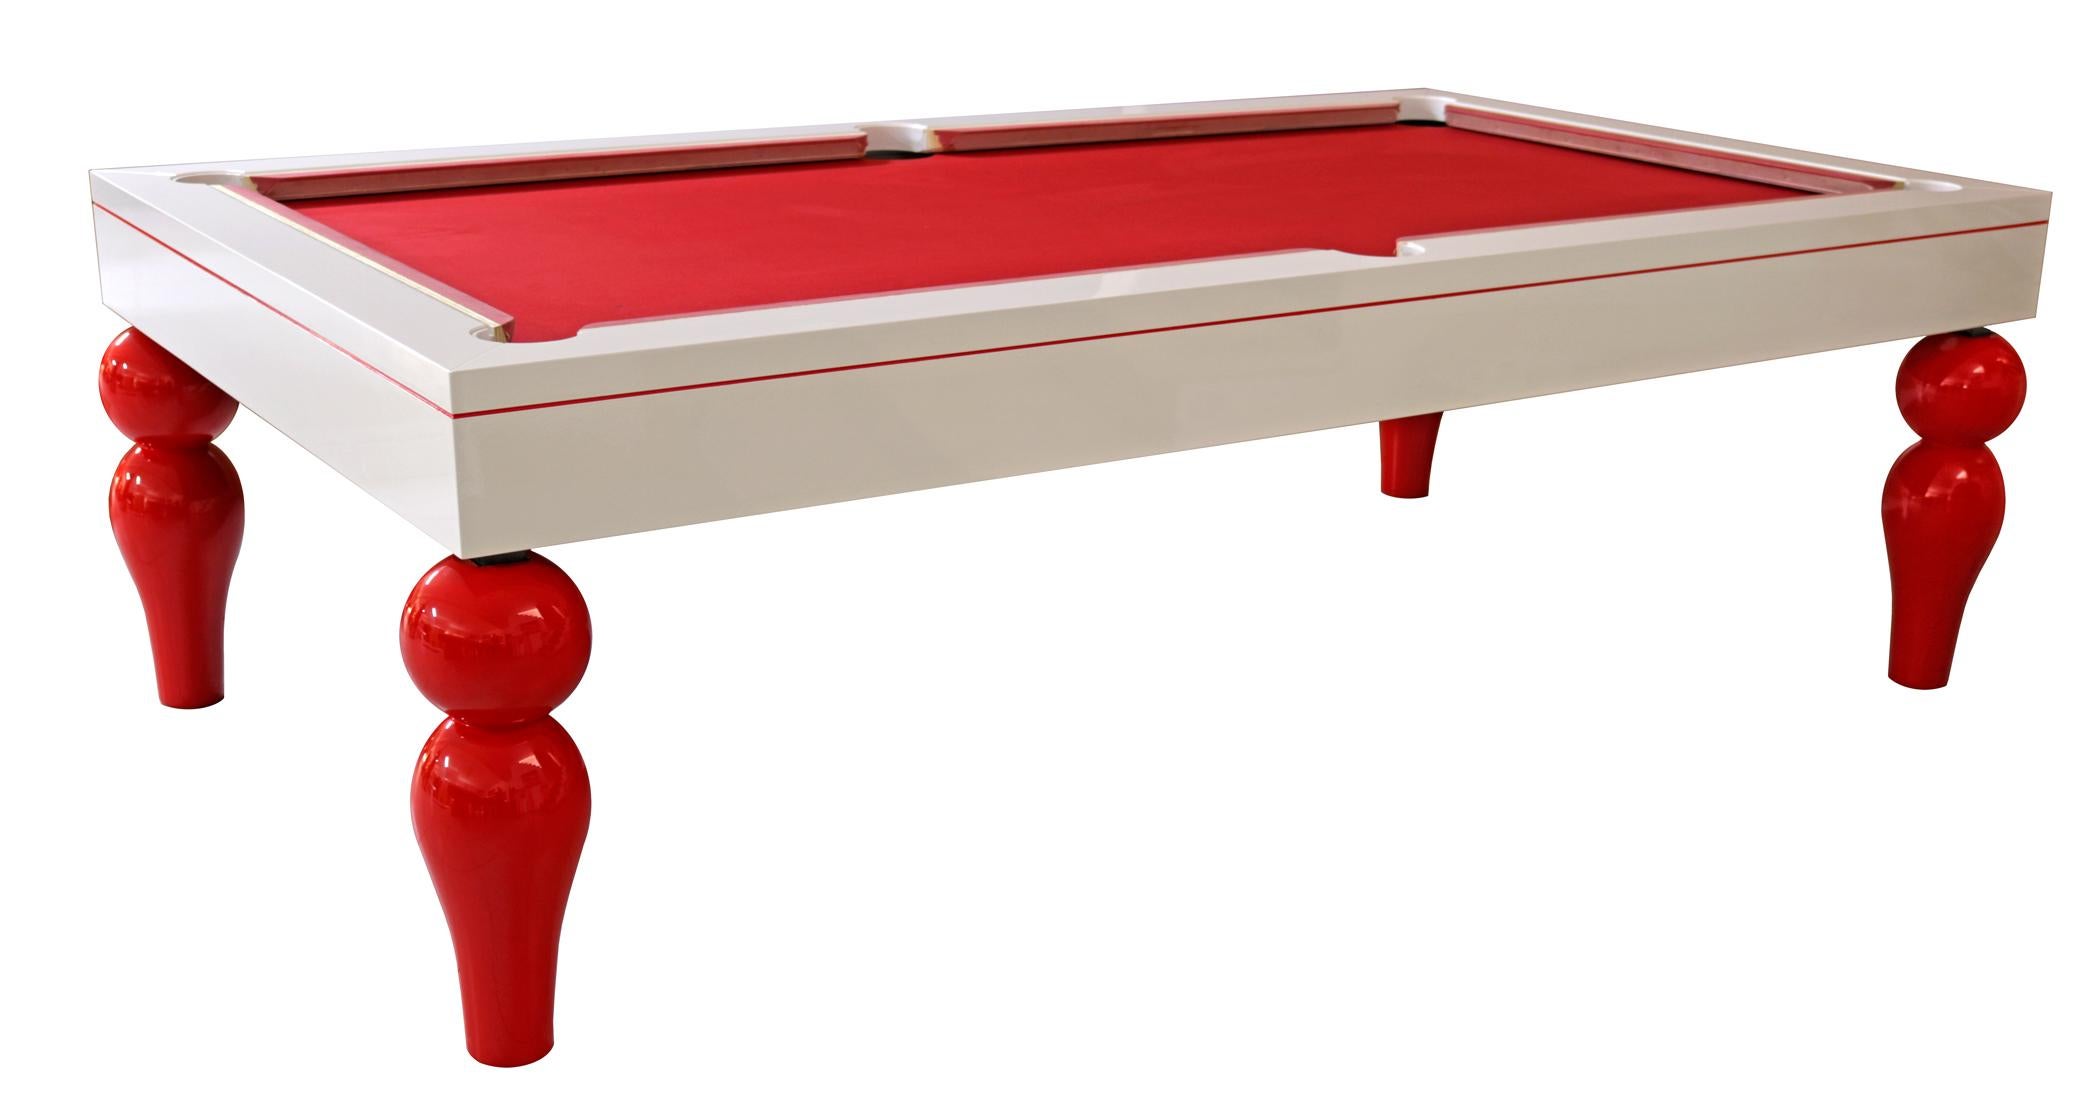 Dining table, billiard, snooker POOL table and Ping-Pong table with a modern design.

A fine quality adjustable dining snooker, billiard, POOL table. The billiard dining table comes with three removable leaves. The leaves turn the POOL table into